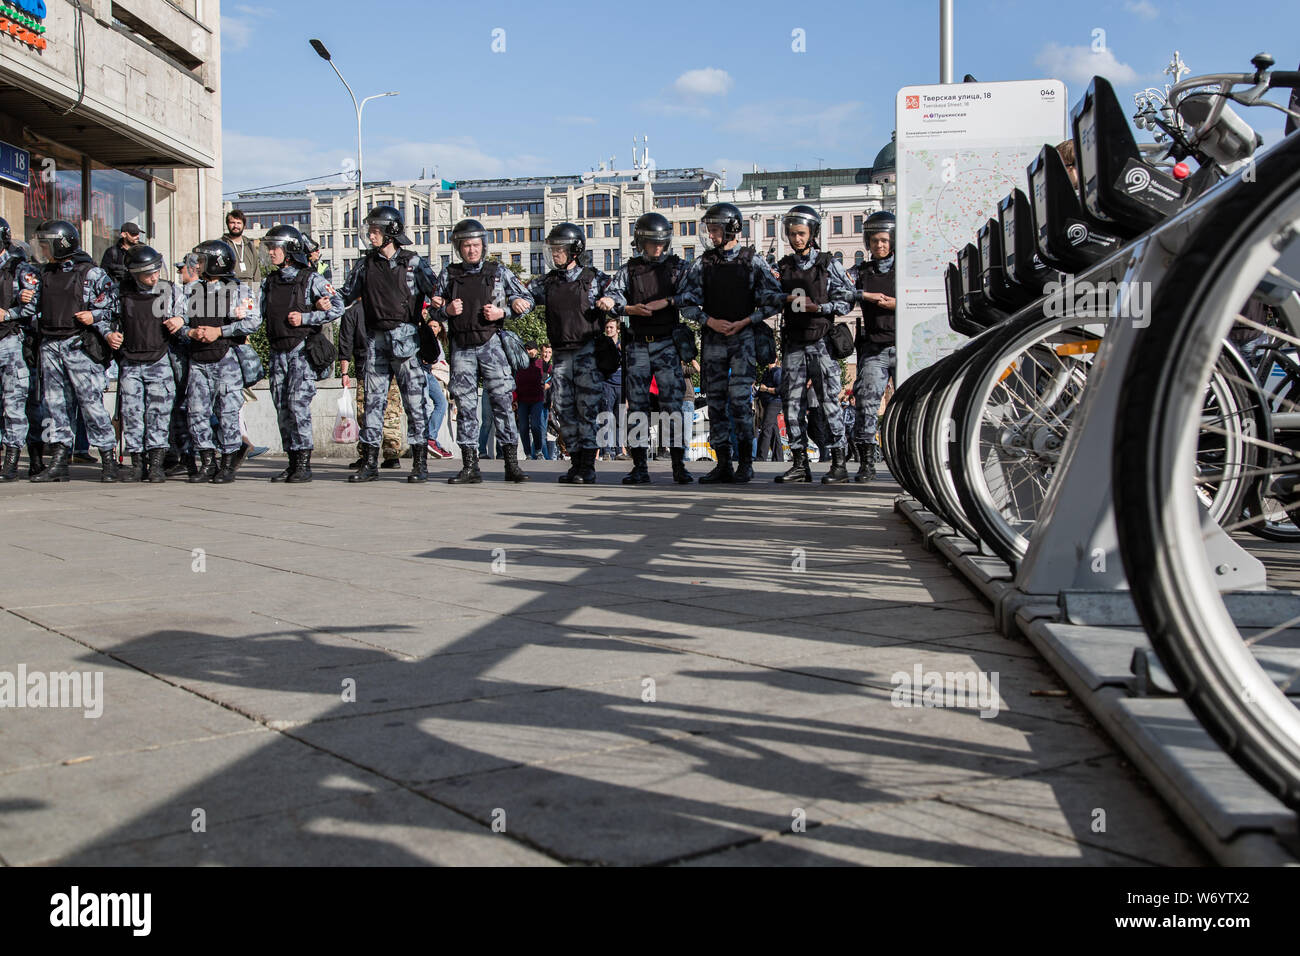 Police block a street during an unsanctioned rally in the centre of Moscow.Moscow police detained more than 300 people who were protesting against the exclusion of some independent and opposition candidates from the city council ballot, a monitoring group said. Stock Photo